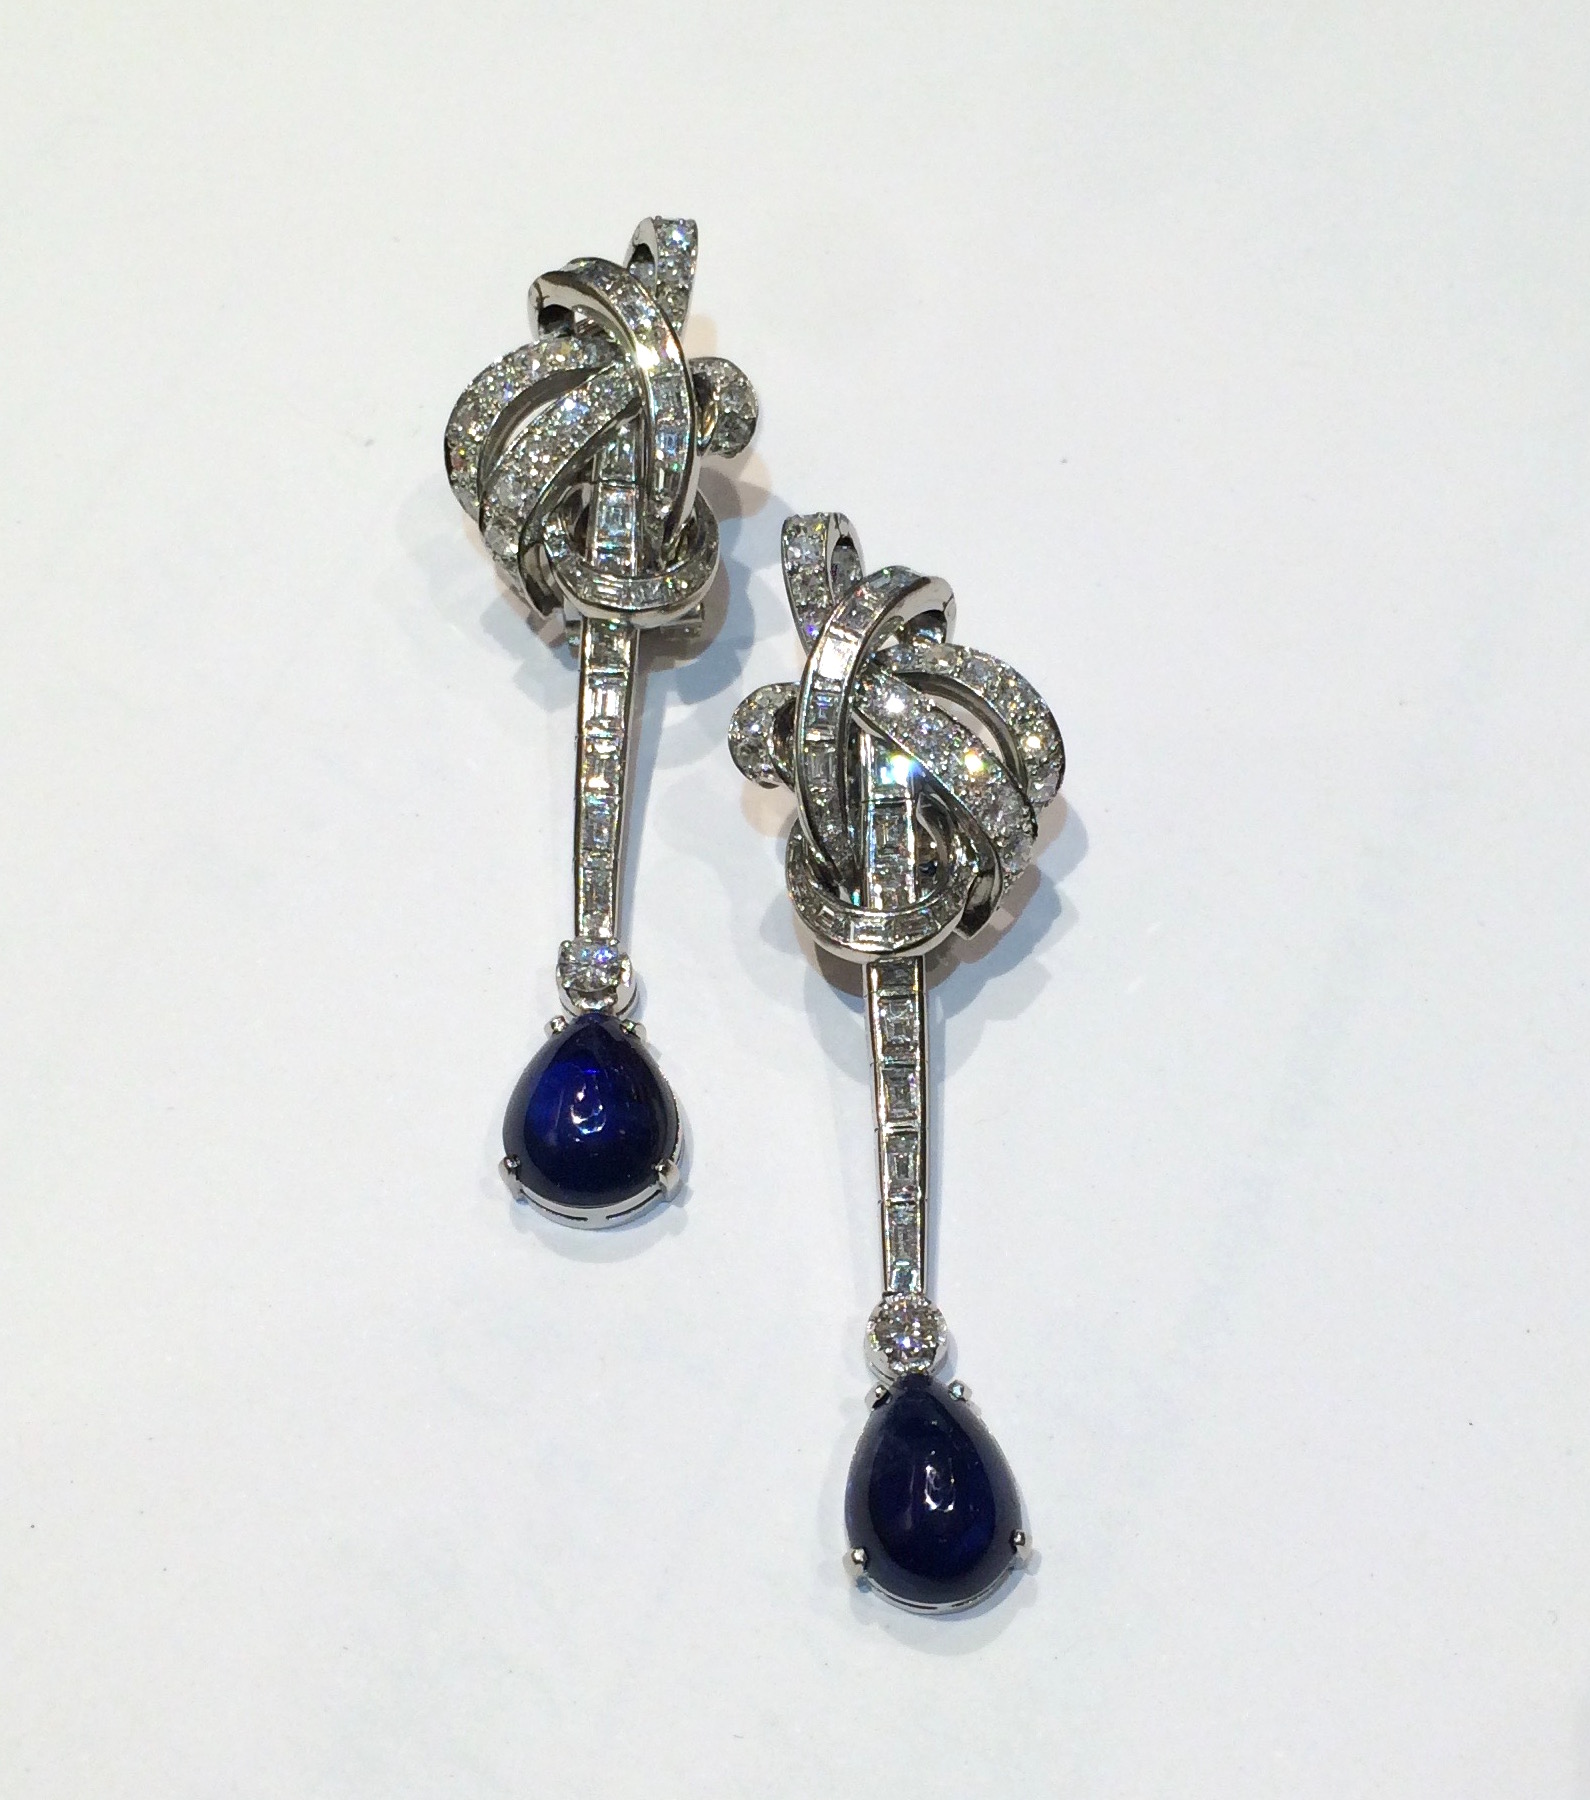 American Pendant “Knot” earrings set with two natural cabochon sapphires (GIA certificate, approximately 6 carats TW) and further set with 50 round diamonds (approx. 6 carats TW) and 48 baguette, square and tapered diamonds (approx. 7 carats TW) all set in platinum mounts, marked, c.1950